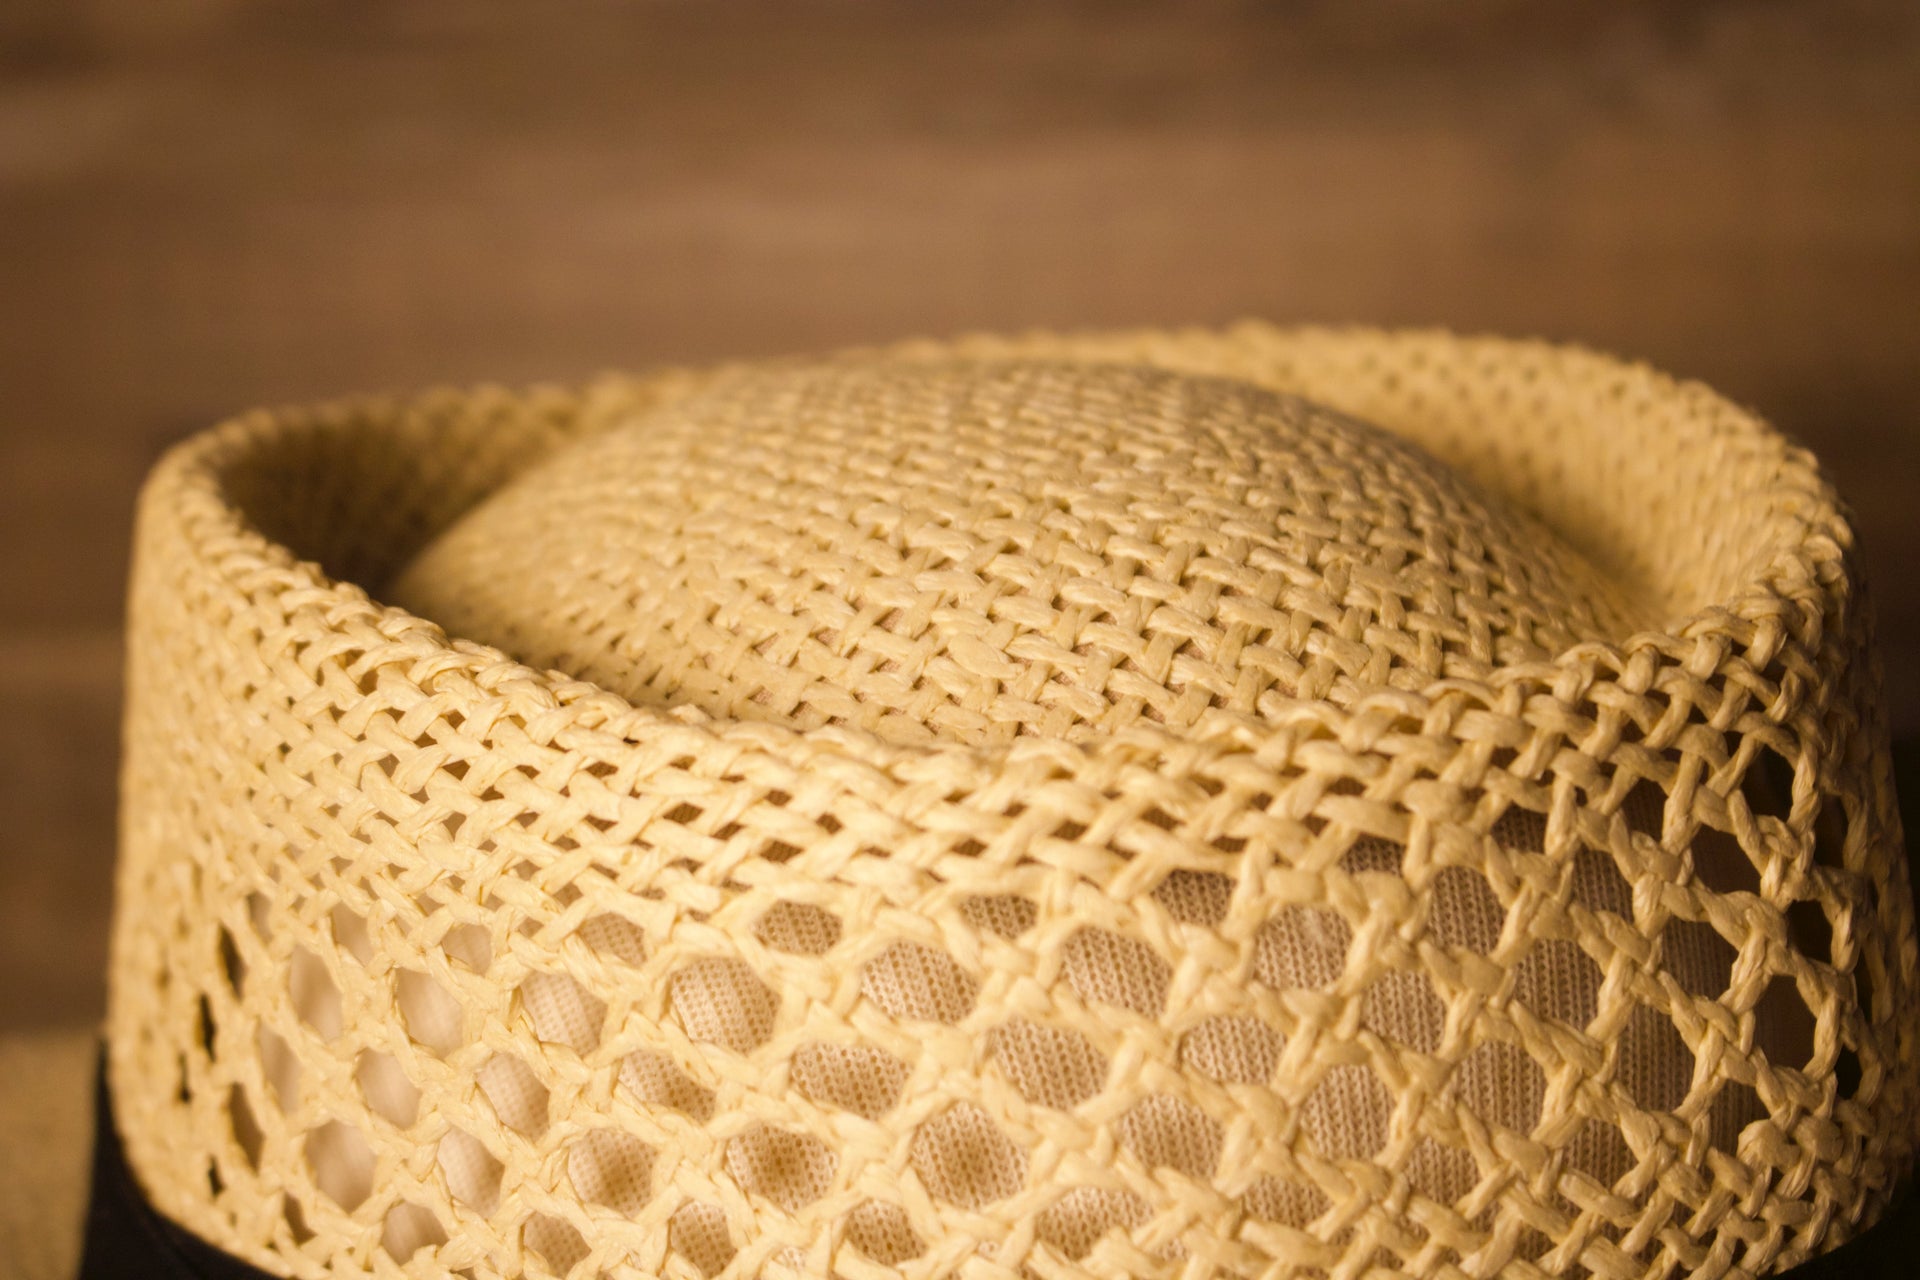 Ocean City Hat | Ocean City Natural Straw Hat the top is made to feel comfortable on your head 